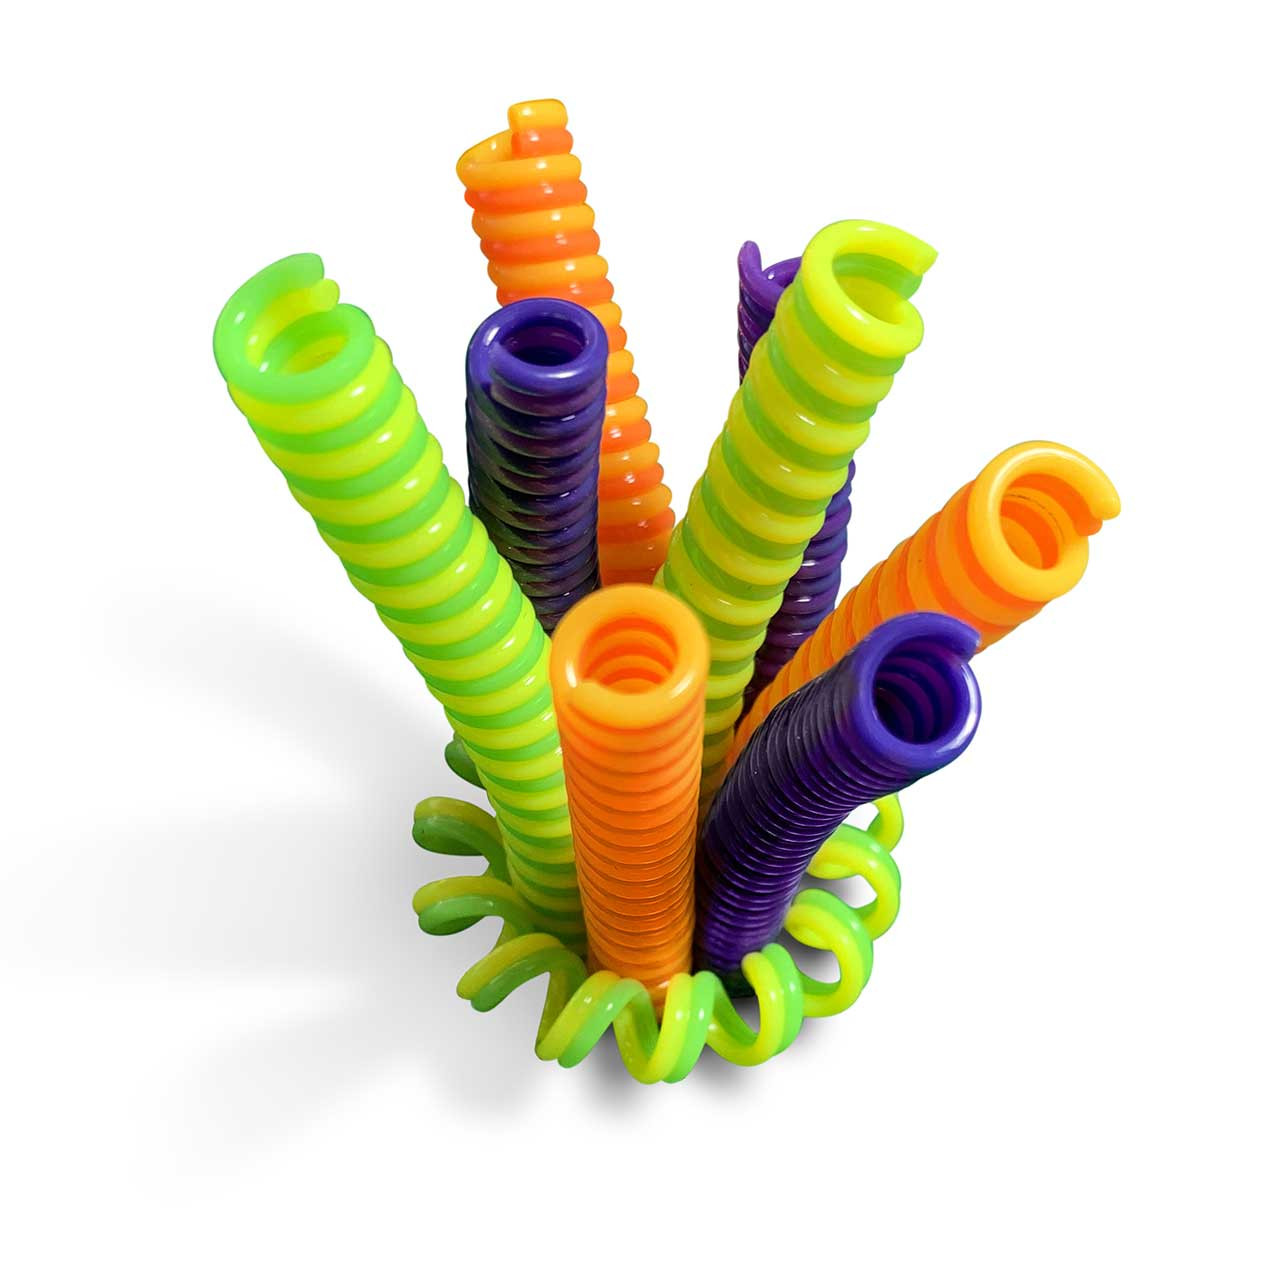 4pcs Relaxing Fidget Twist Spiral Toy Anxiety MELBOURNE STOCK 